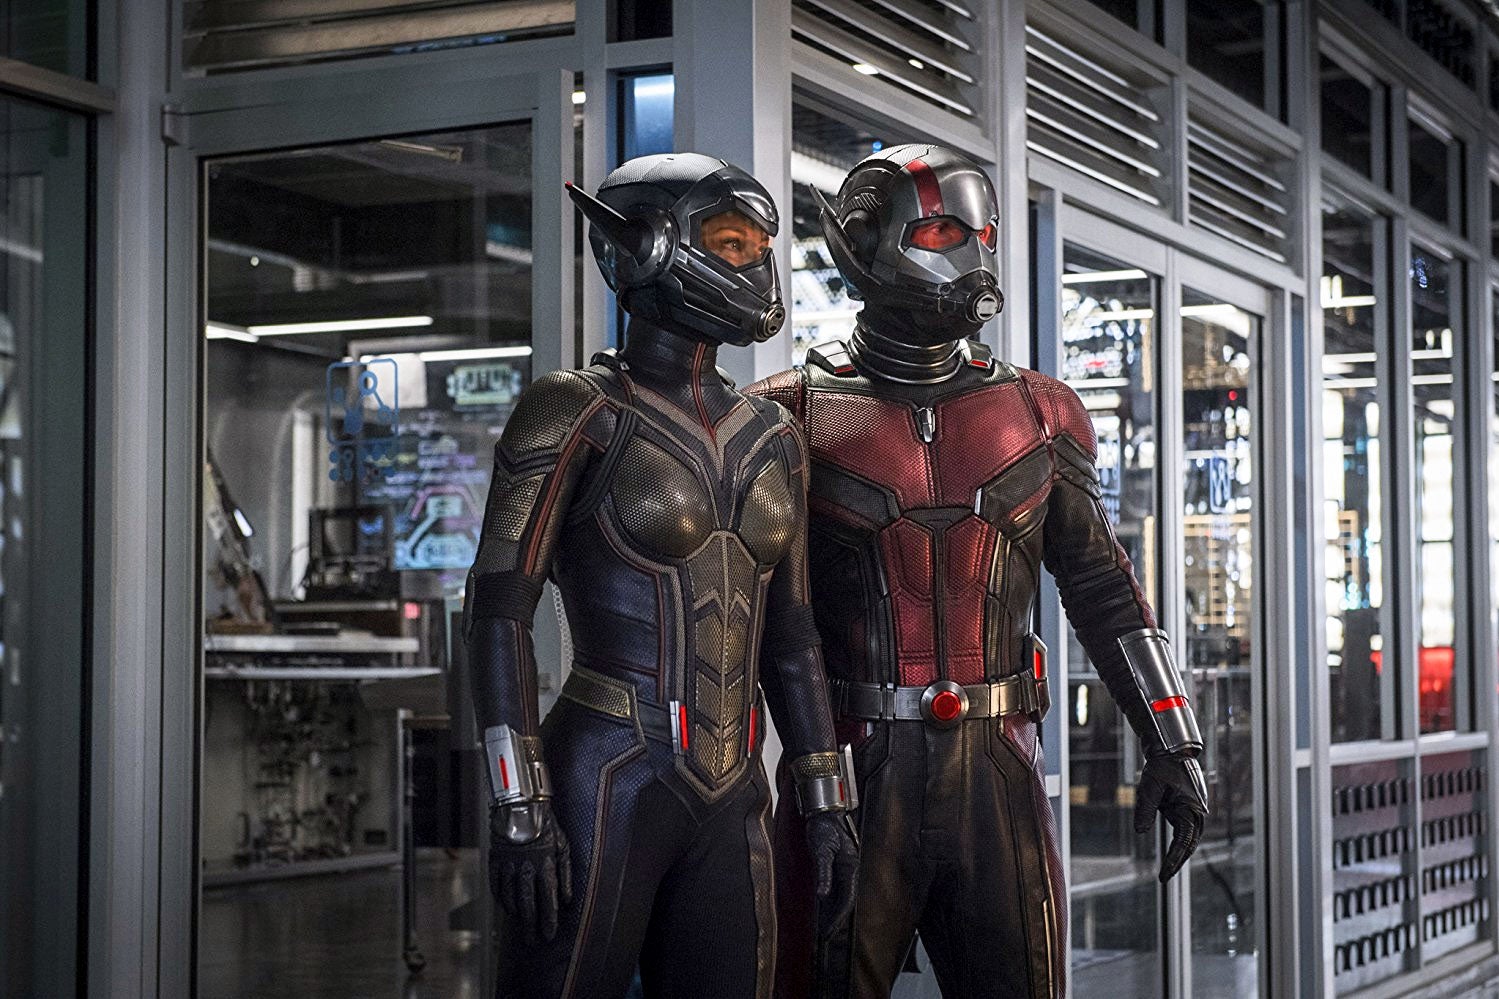 The Wasp (Evangeline Lilly) and Ant-Man (Paul Rudd).